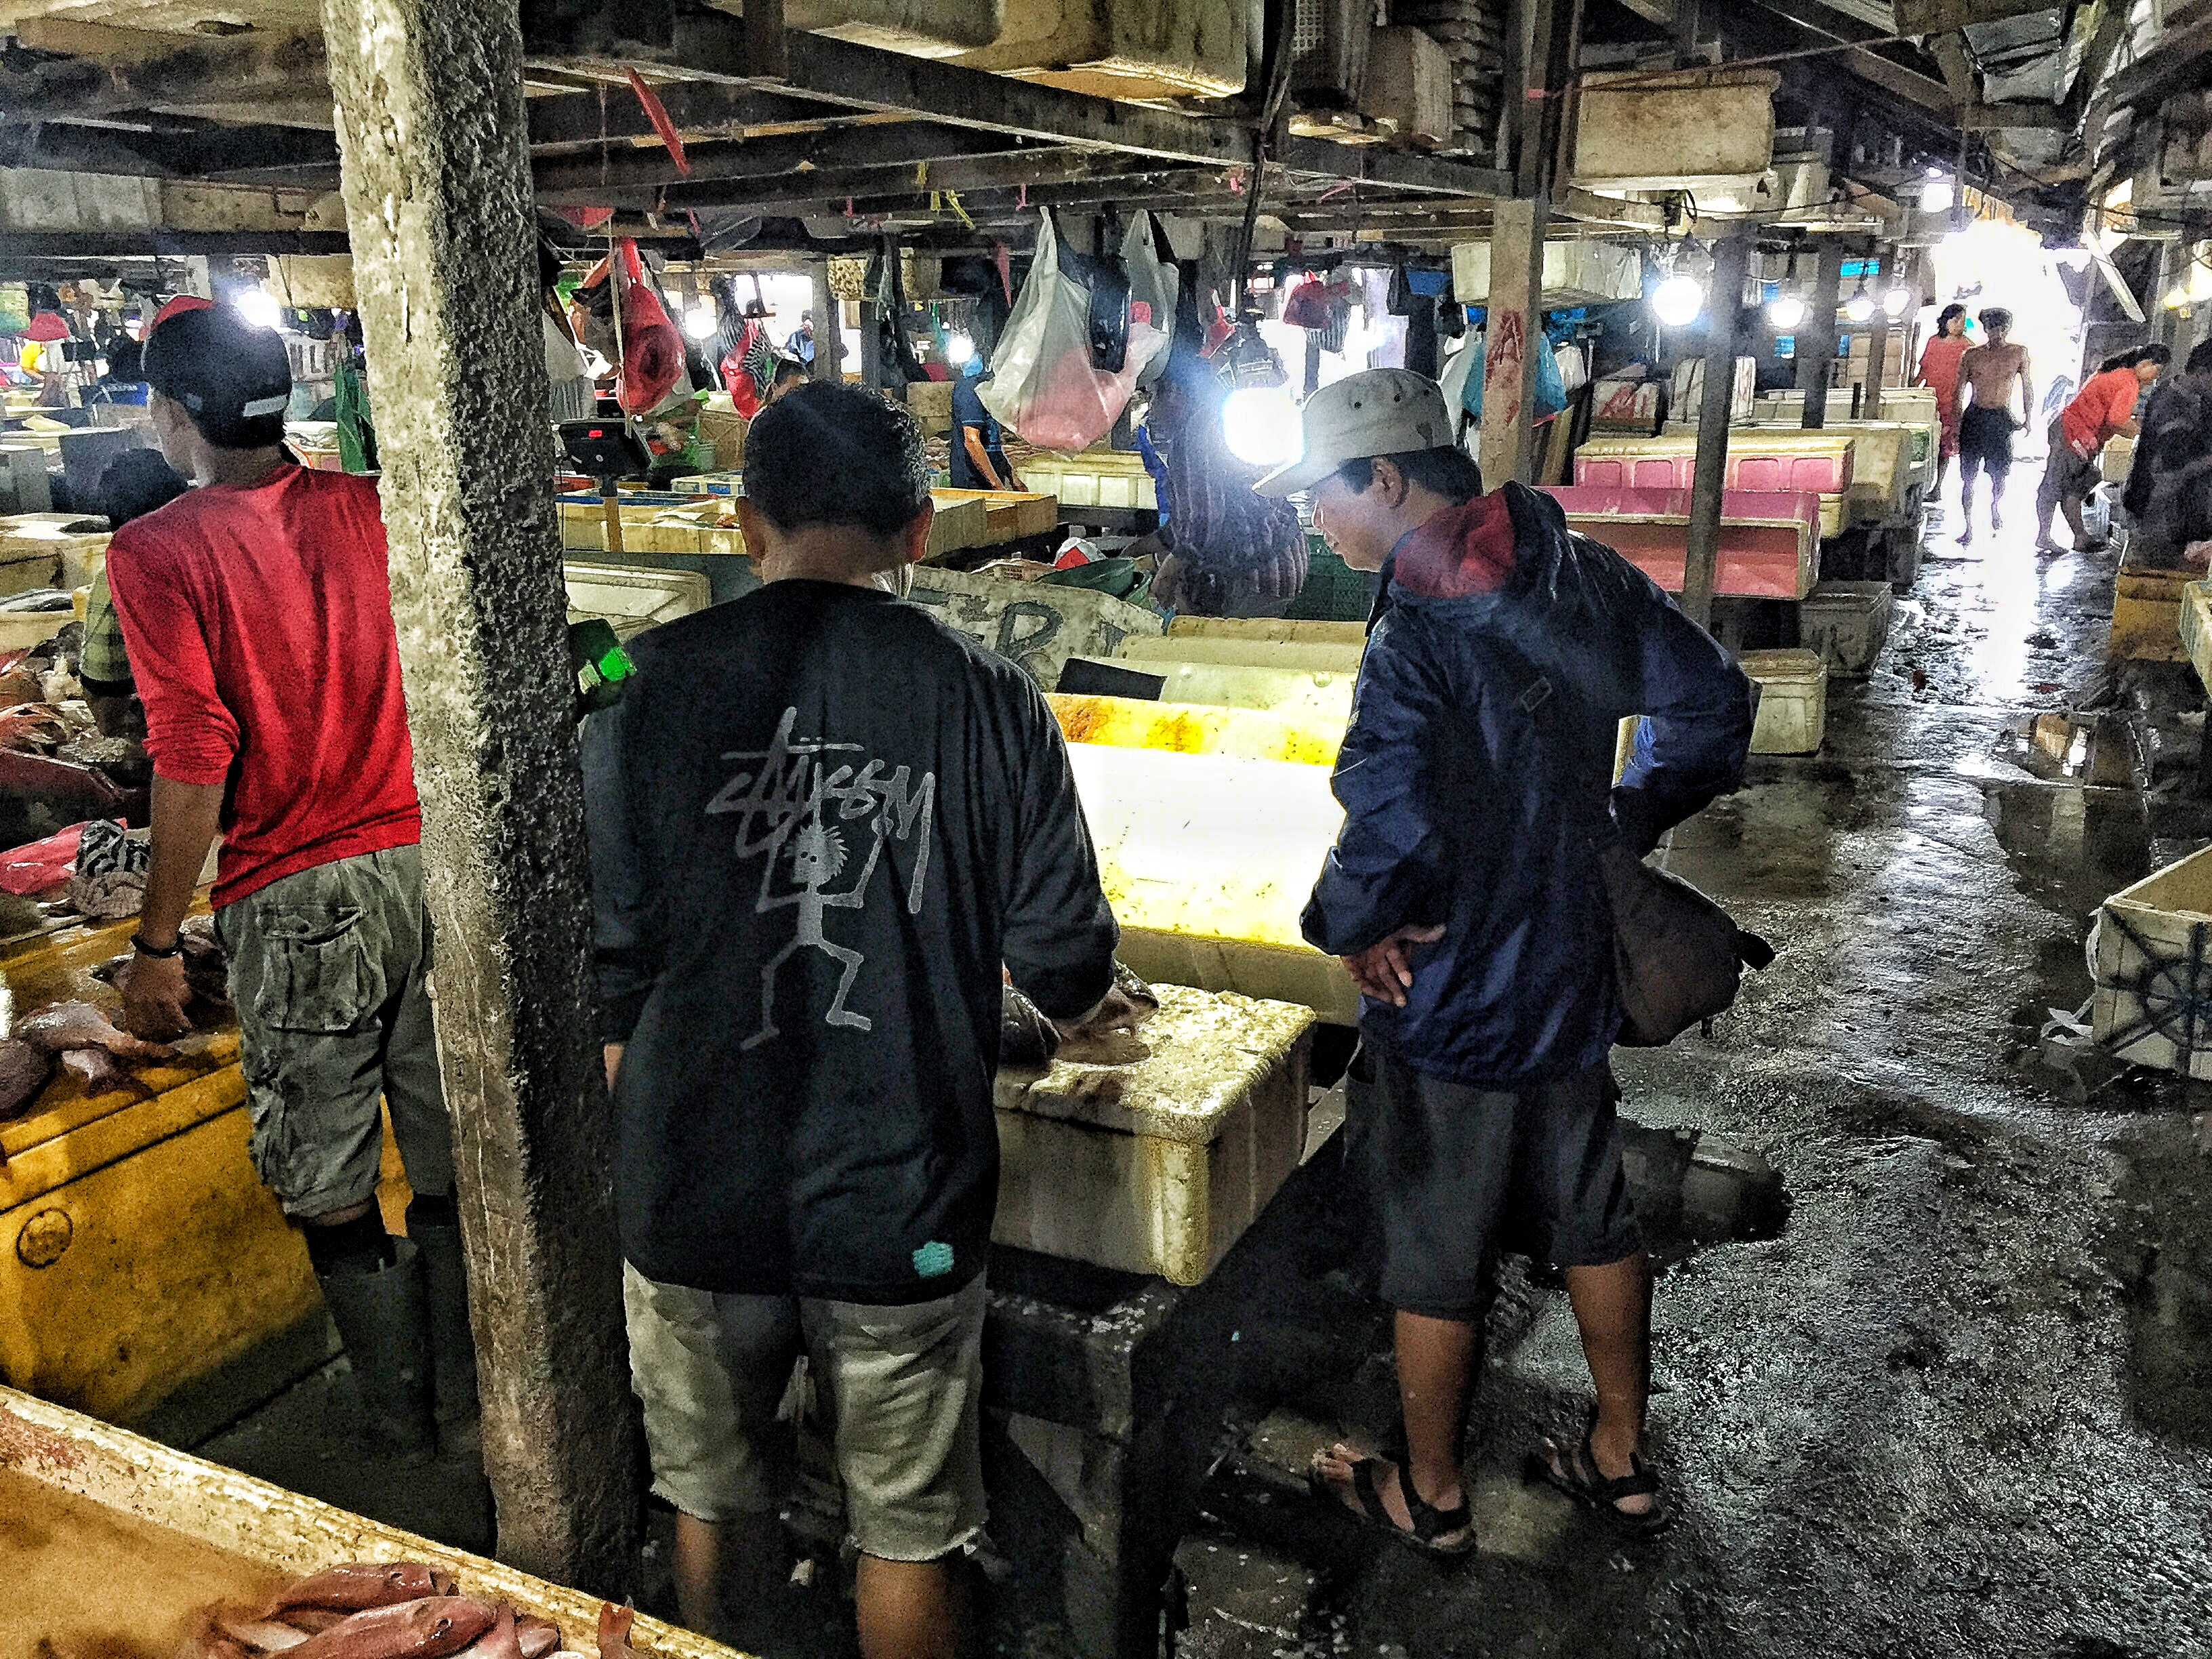 COOKING CLASS AND MARKET SHOPPING WITH THE CHEF FROM THE RITZ-CARLTON BALI market